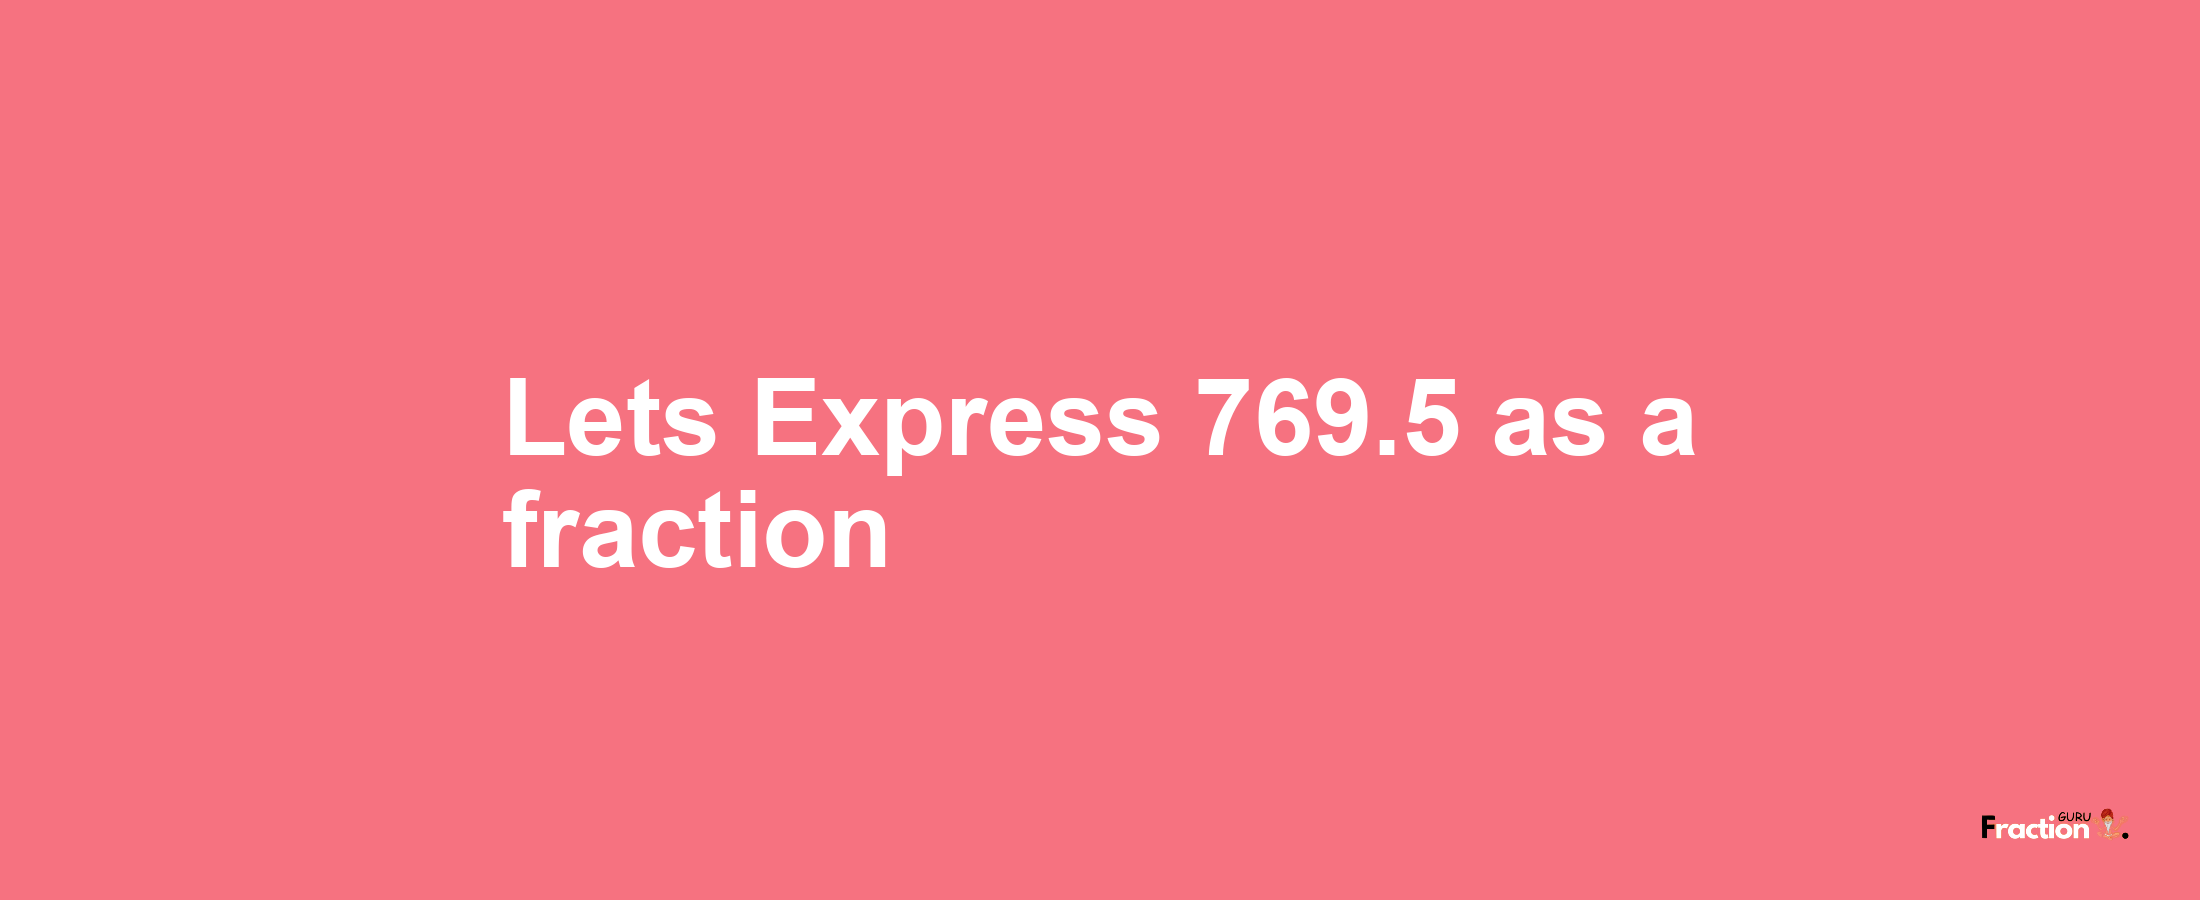 Lets Express 769.5 as afraction